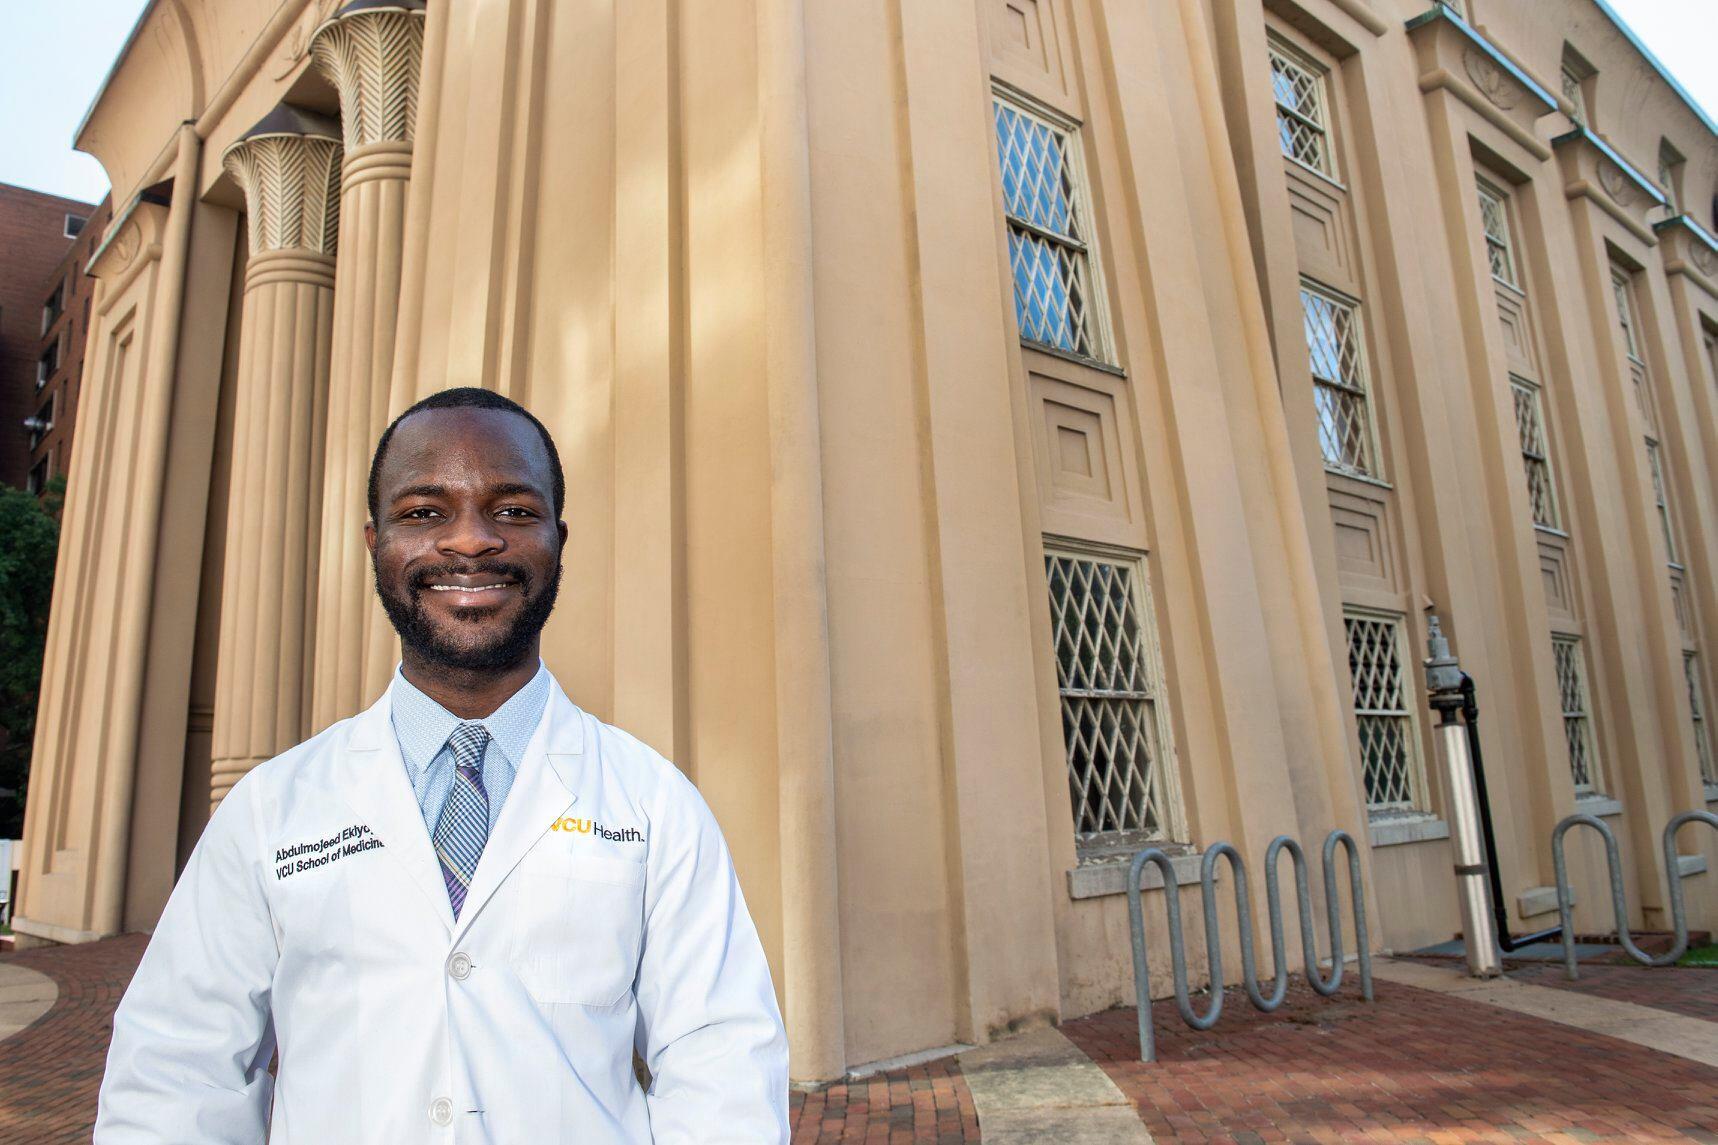 Abdulmojeed Ekiyoyo stands in front of the Egyptian Building on V C U's Medical College of Virginia campus. The right side of his jacket says Abdulmojeed Ekiyoyo, V C U School of Medicine. The left side of his jacket says V C U Health.